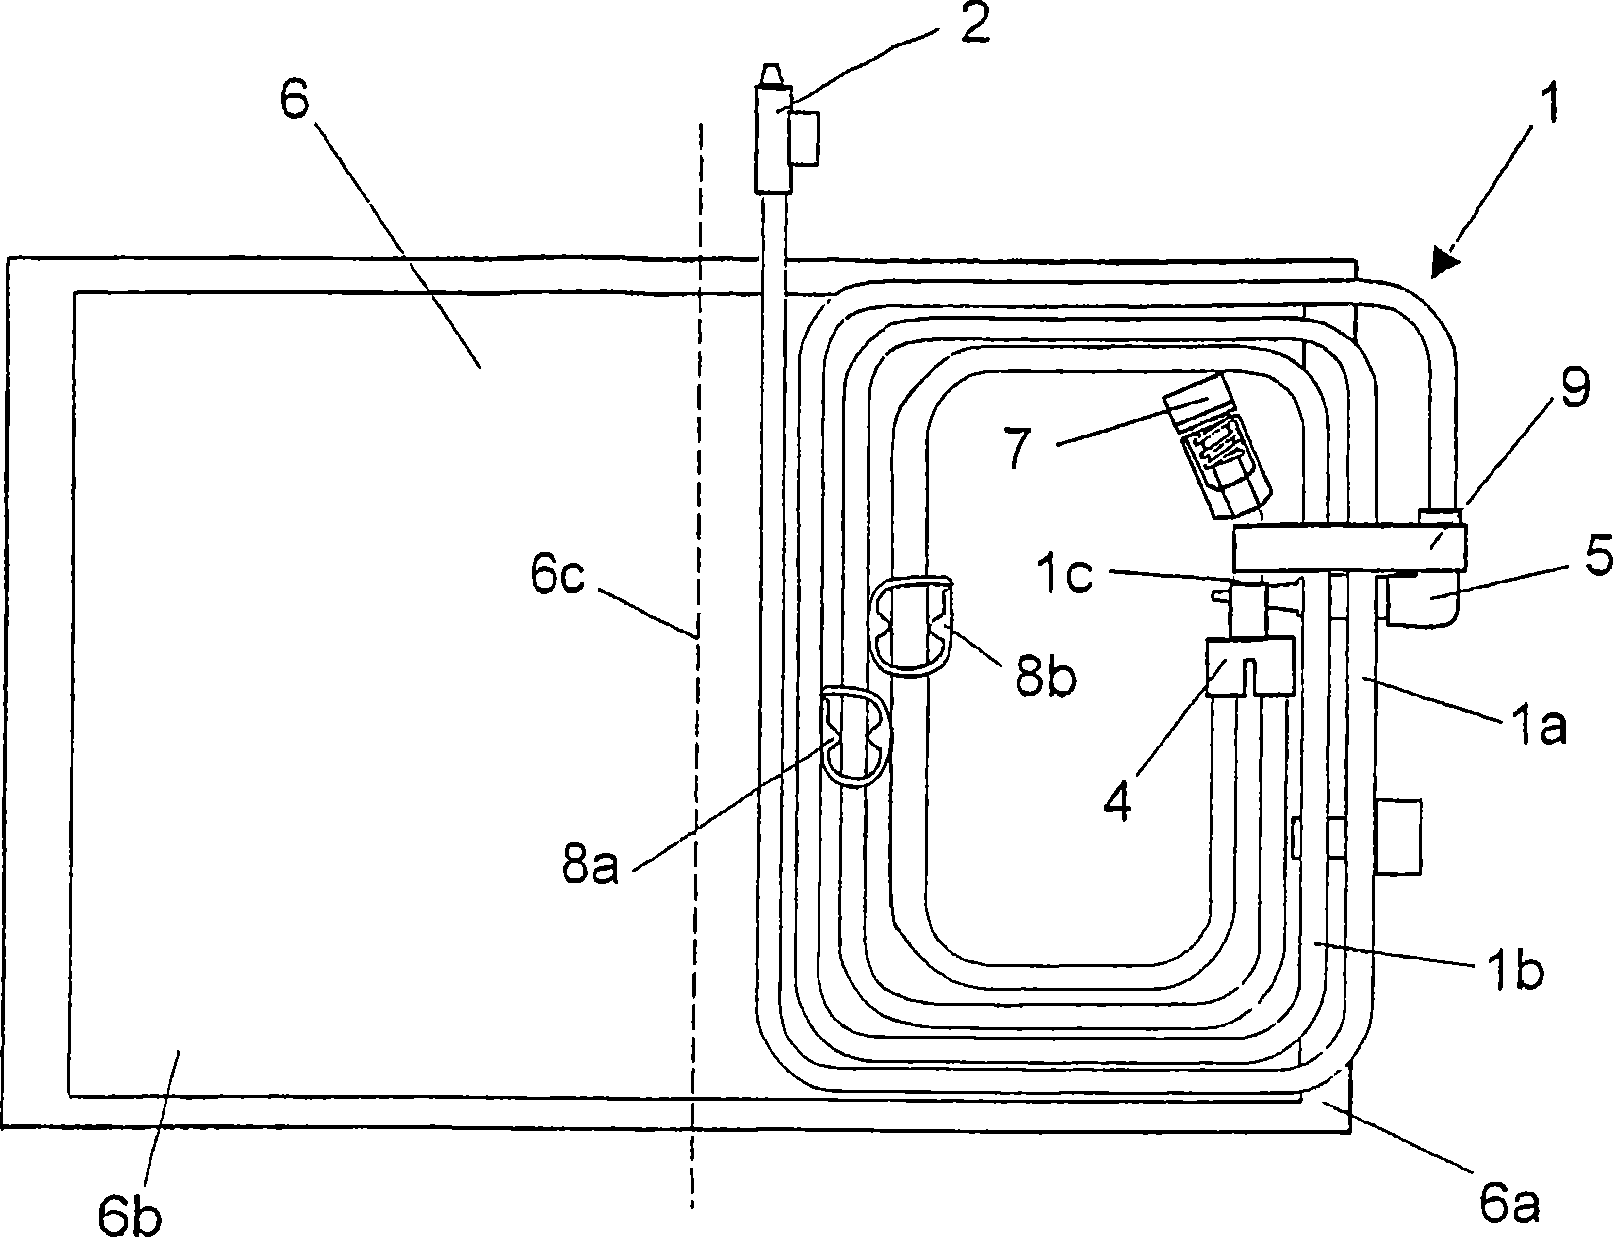 A package for use in a peritoneal dialysis treatment and a method for manufacturing of such a package